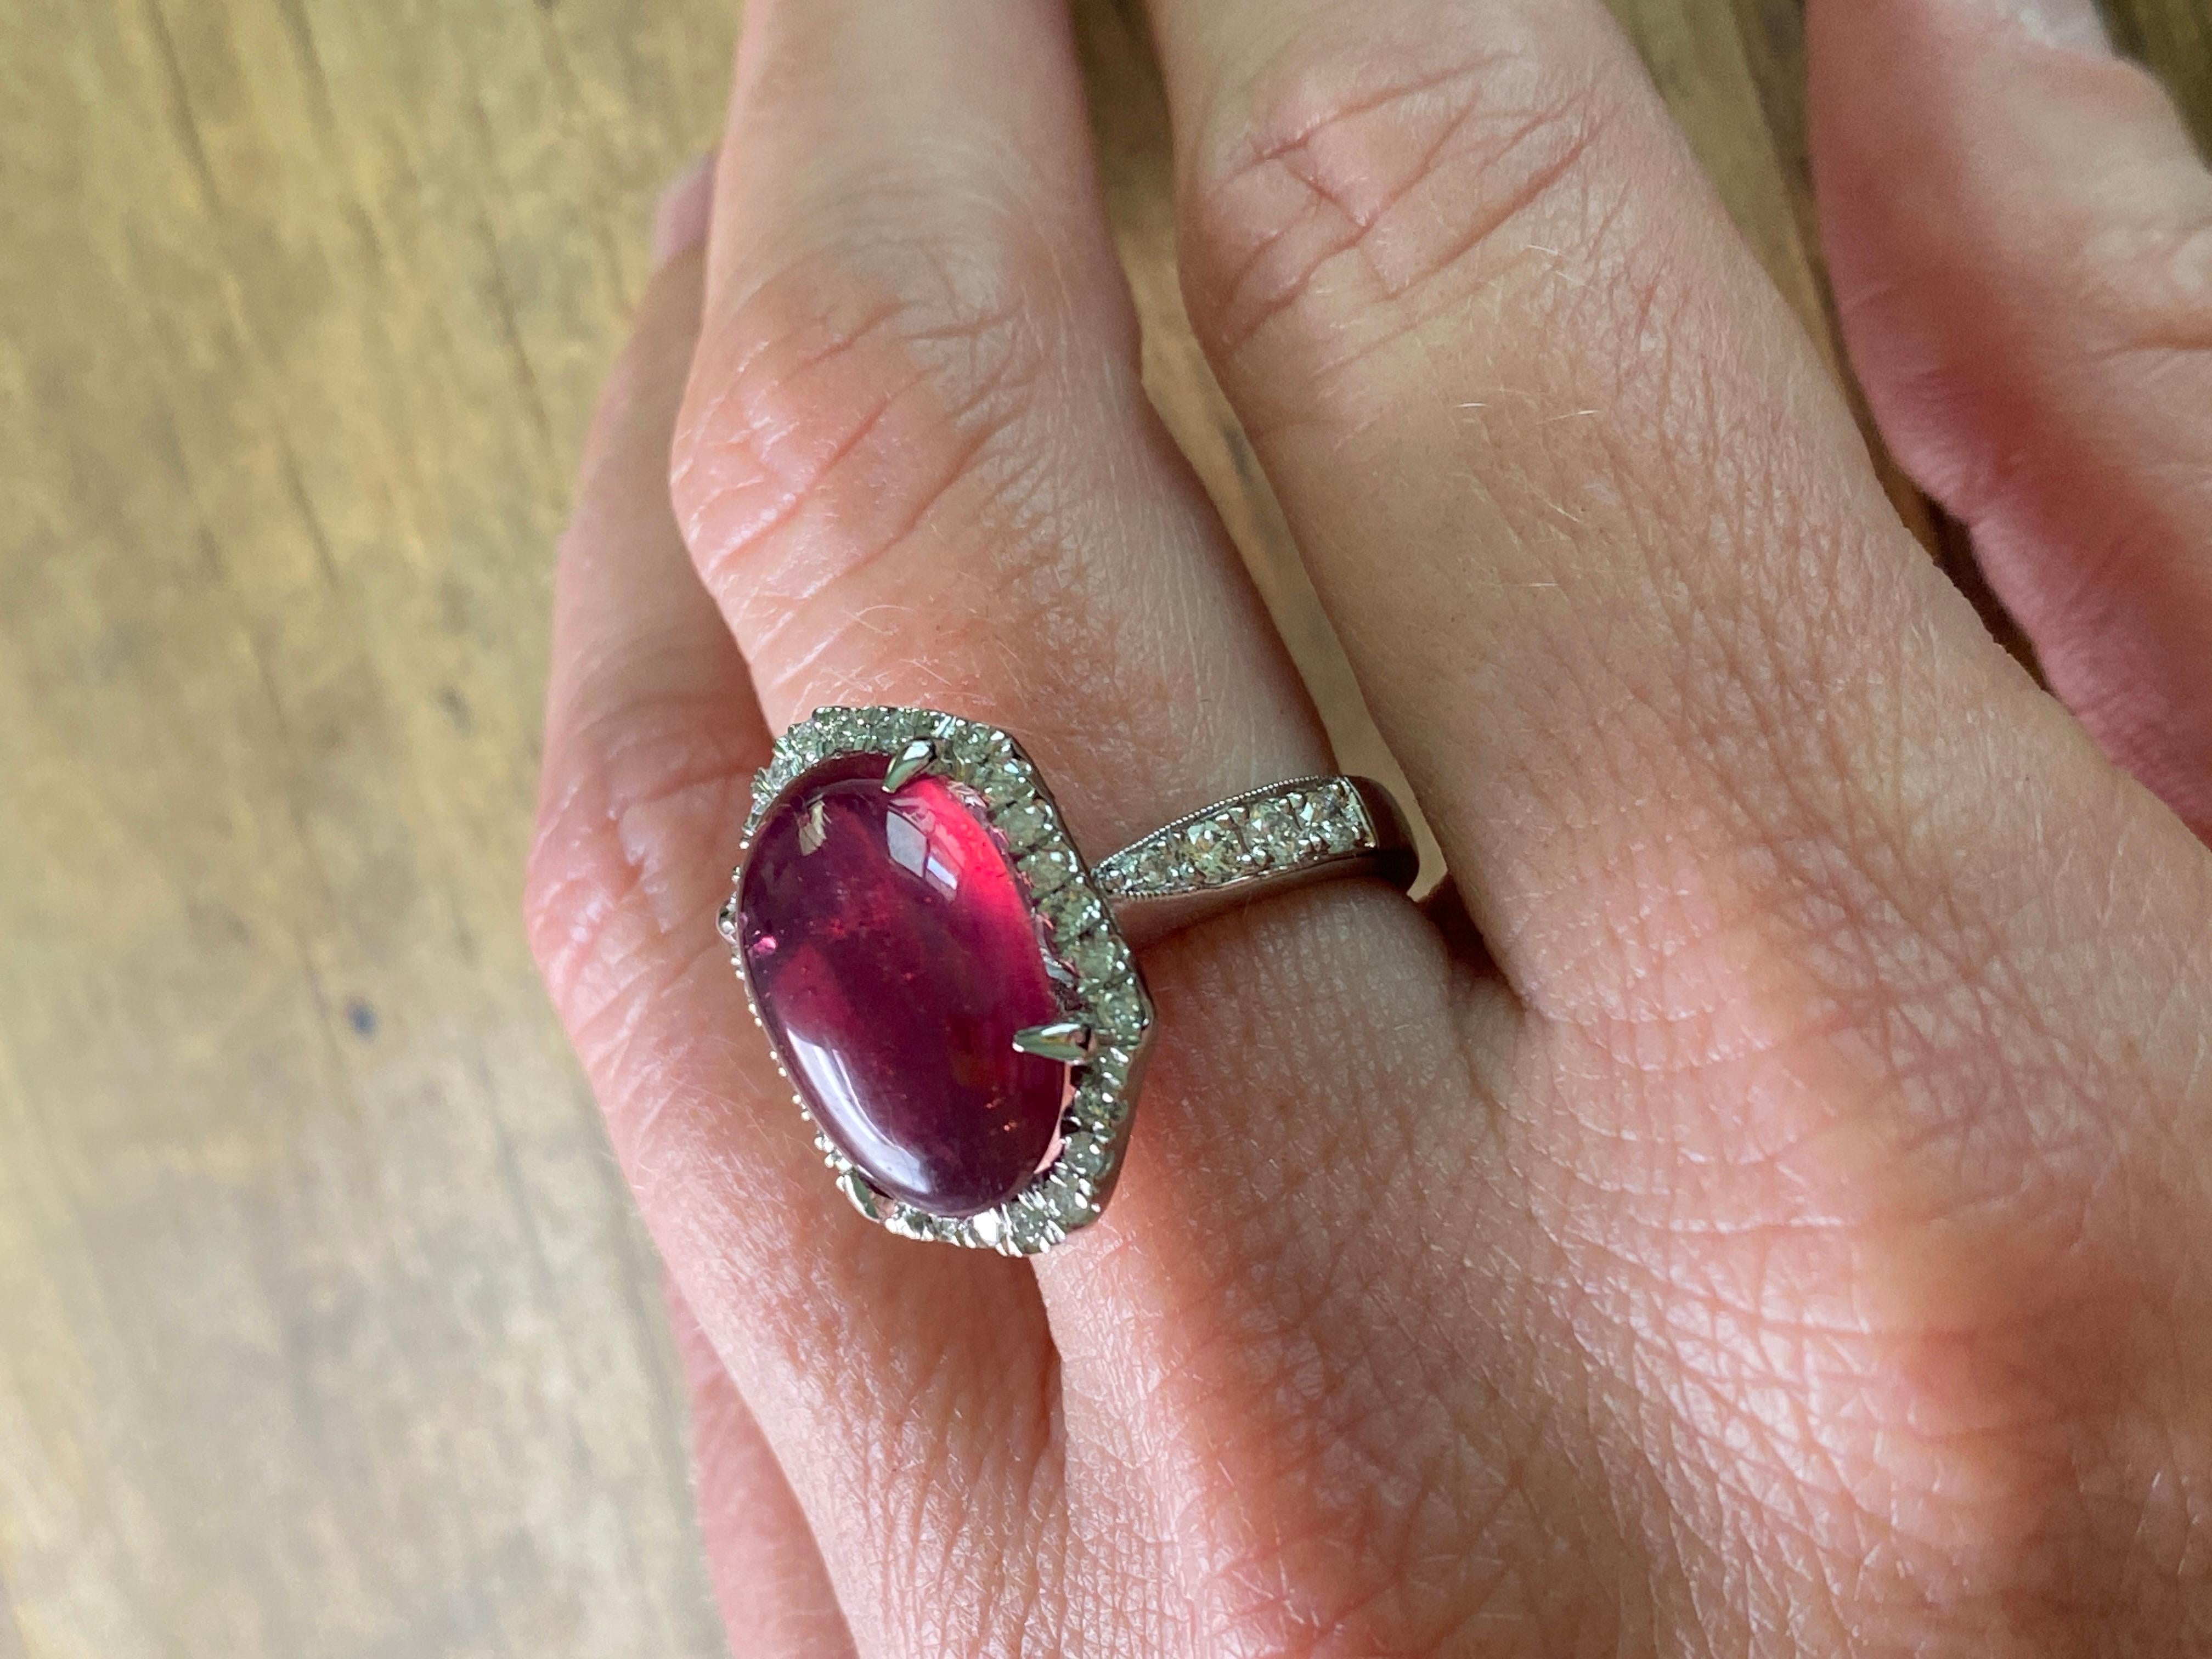 11 Carat Ruby Cabochon, Dome, with Diamonds, Cocktail Ring
Size 6 1/4
Stunning dark pink ruby with minor inclusions. Diamonds are channel set all around and on band.
Sure to be a stunner day or night. 